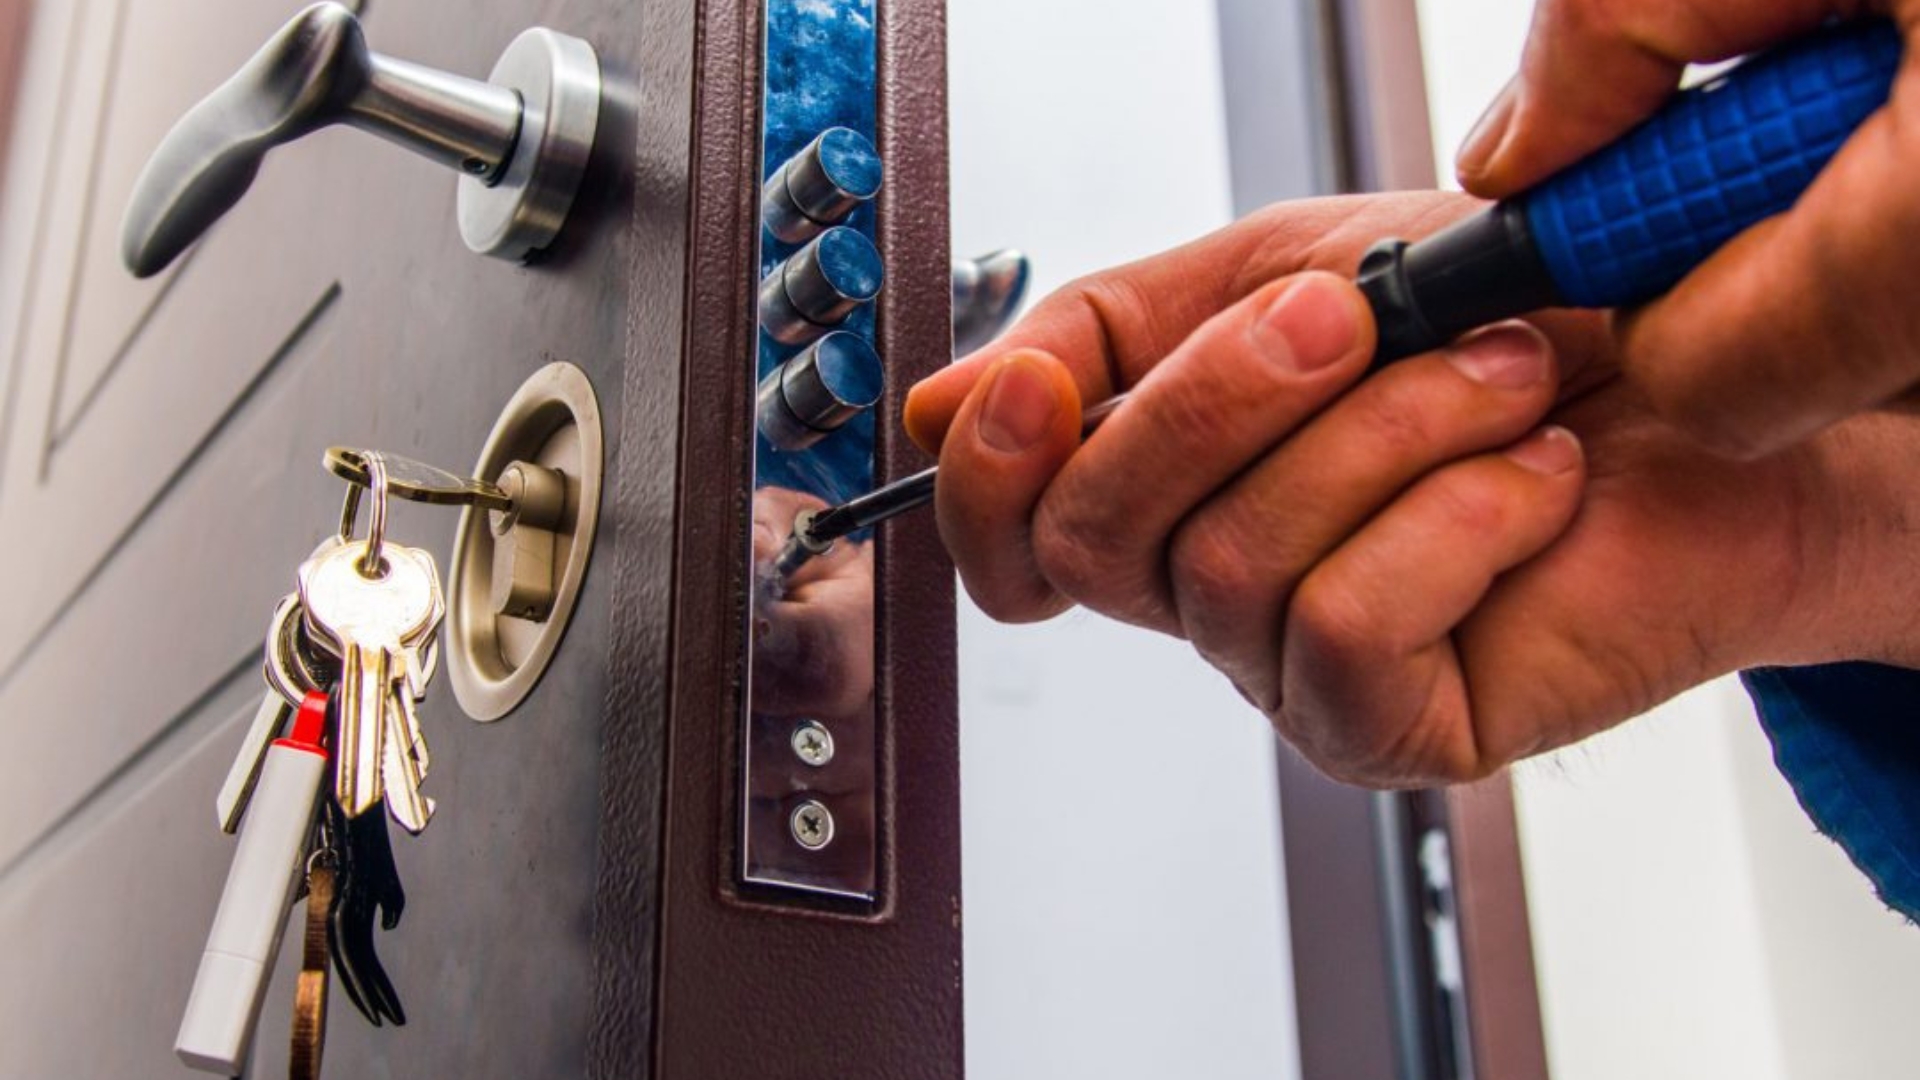 A residential locksmith installing a lock on a residential door